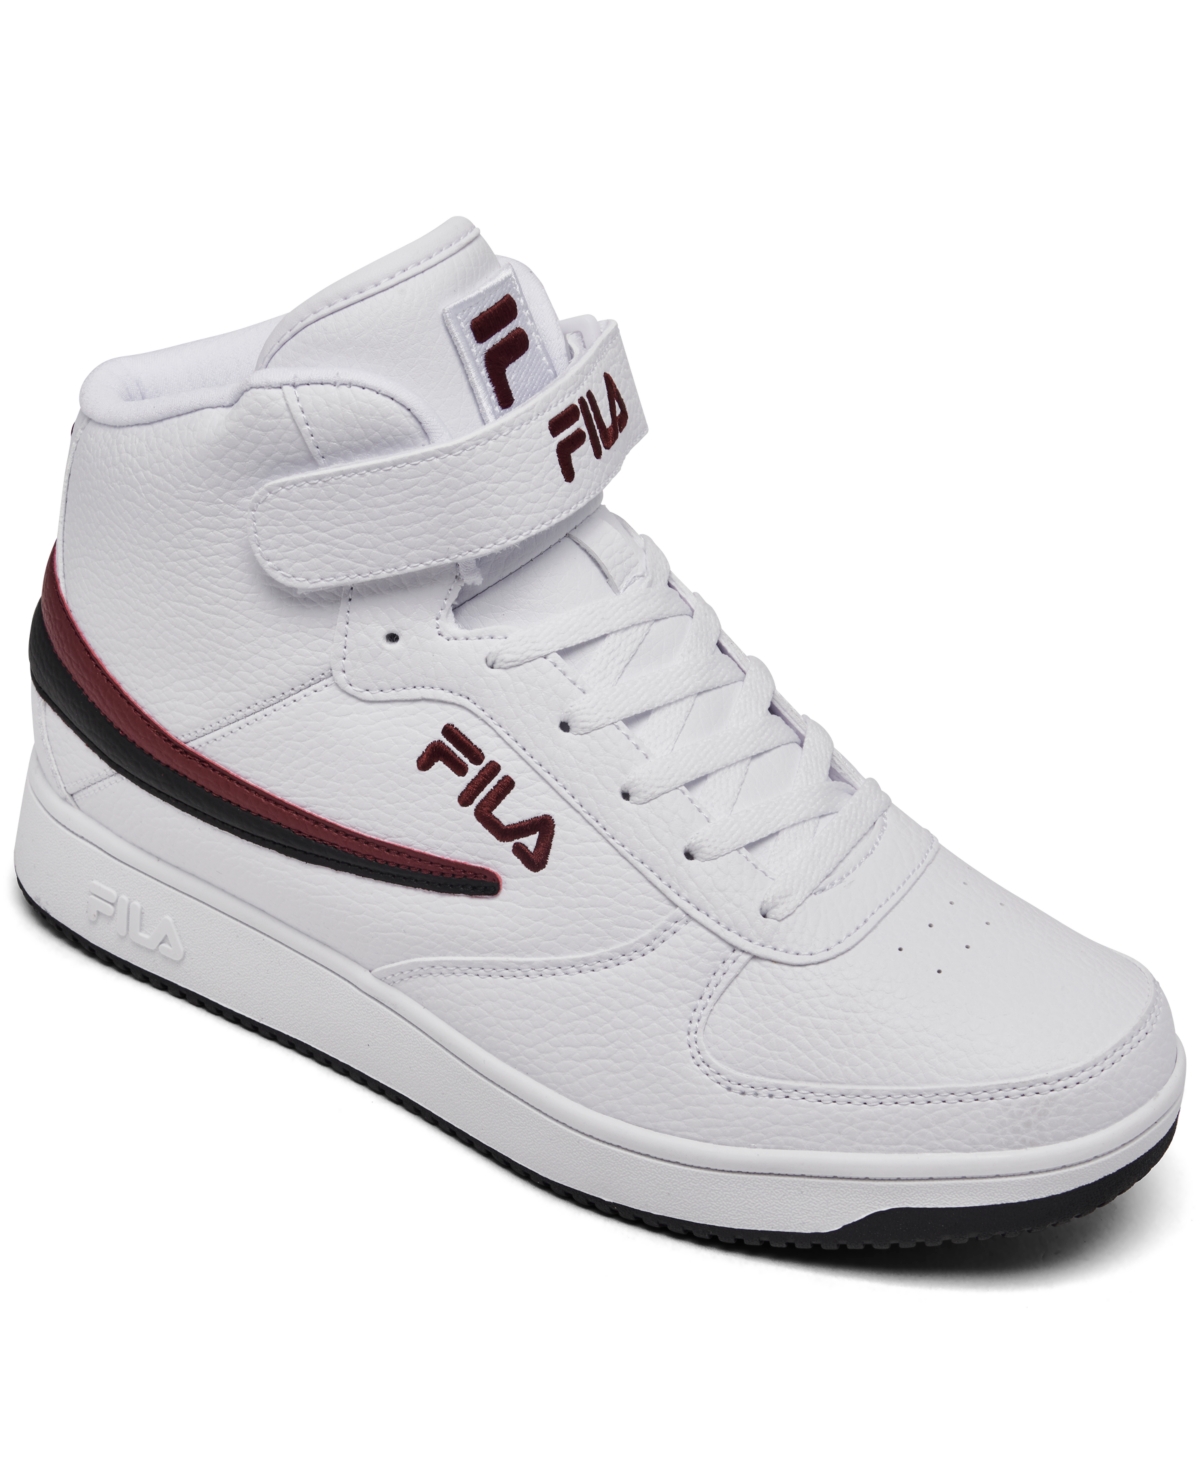 Men's A-High Stay-Put Closure High Top Casual Sneakers from Finish Line - White, Maroon, Black